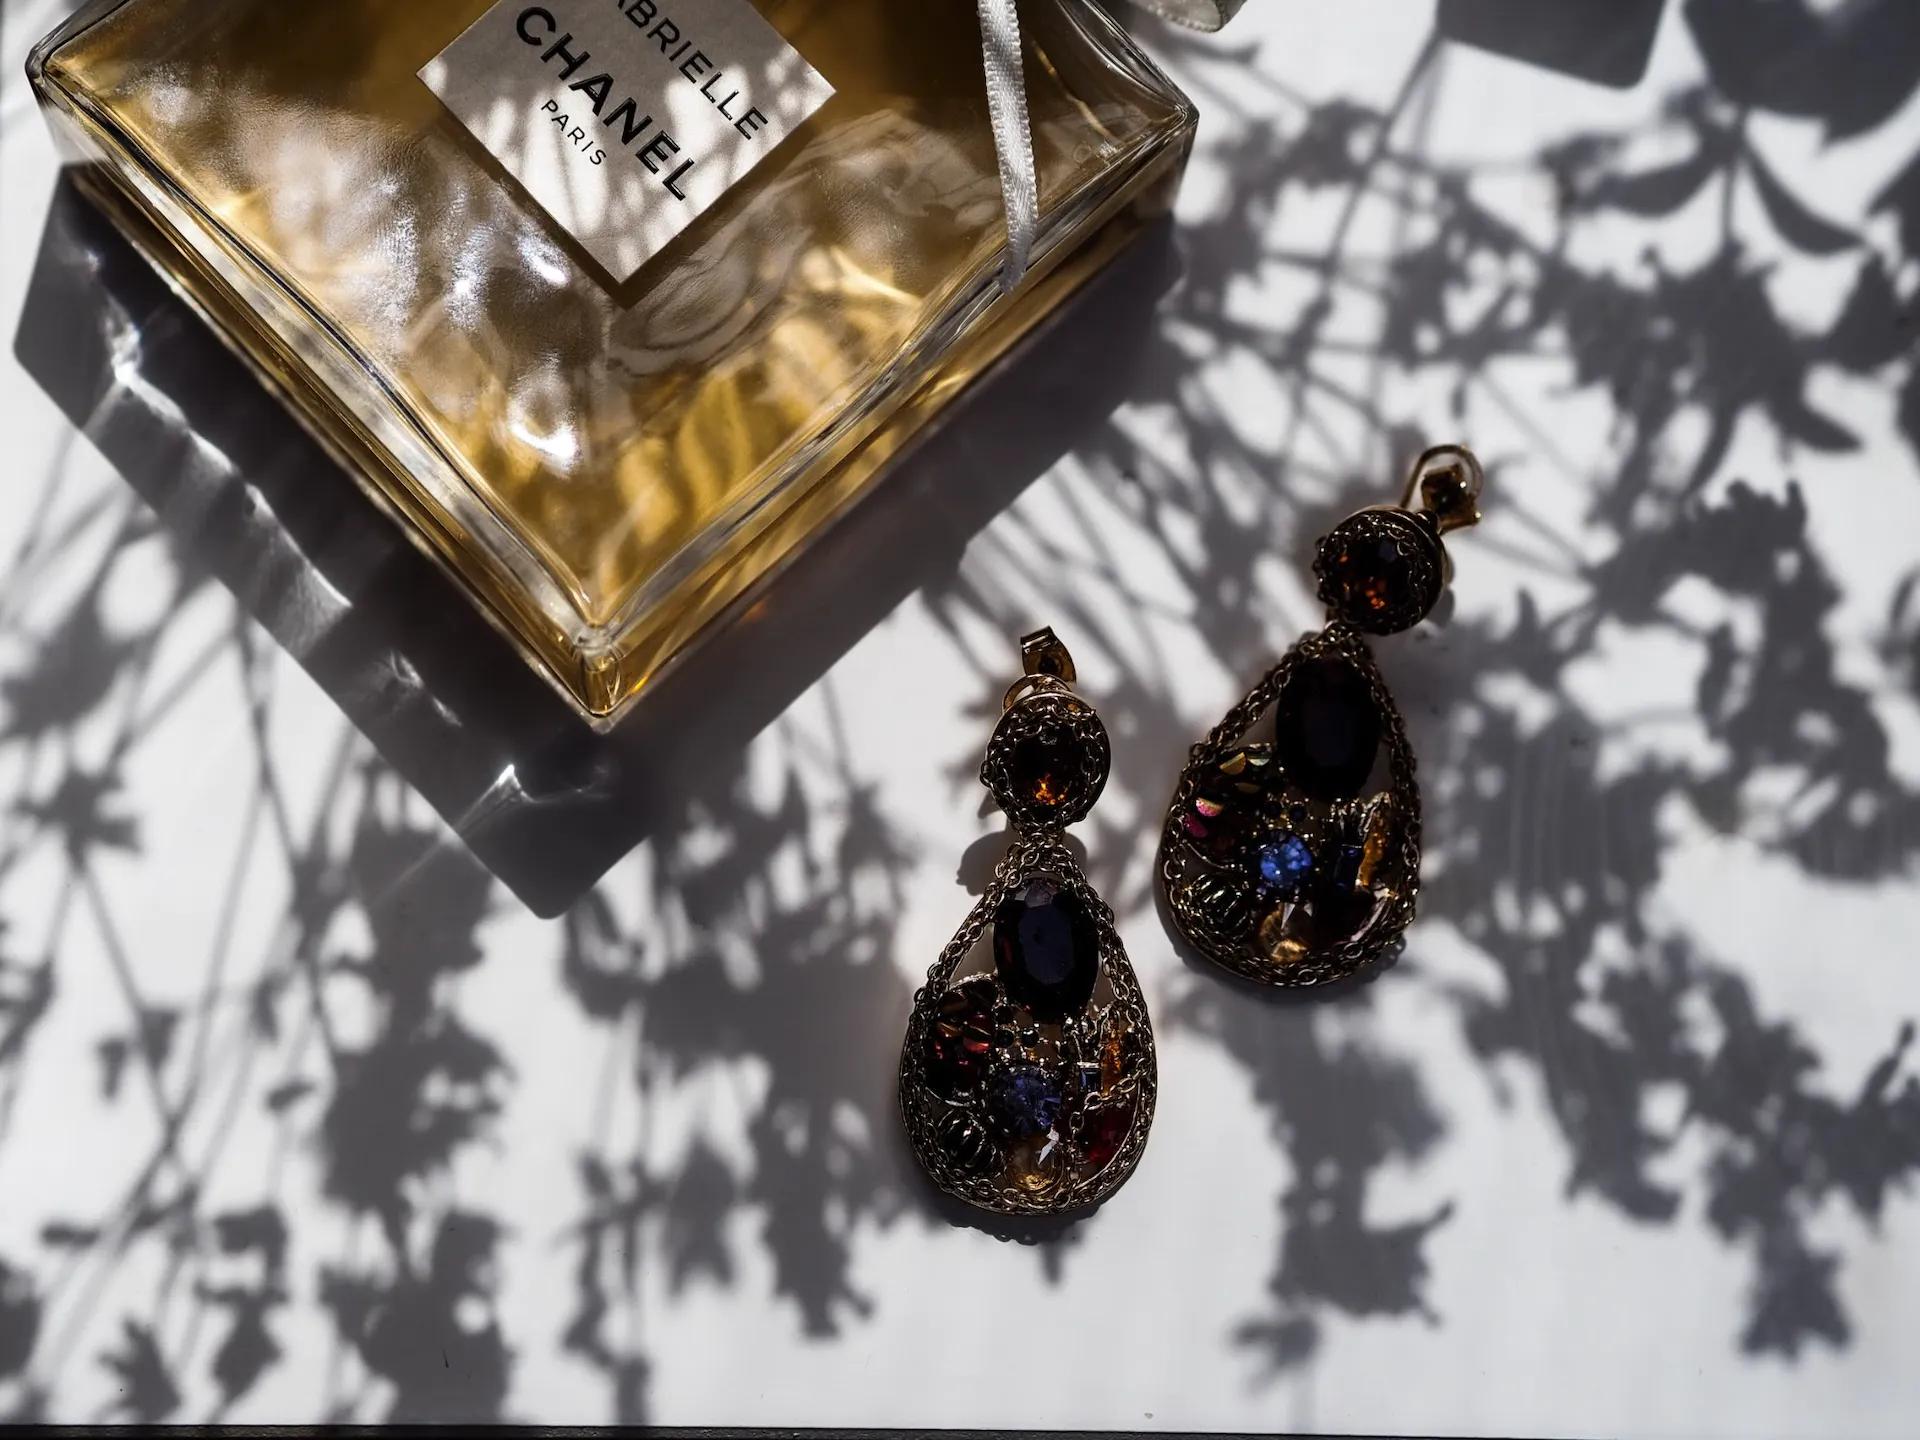 A bottle of perfume and a pair of earings